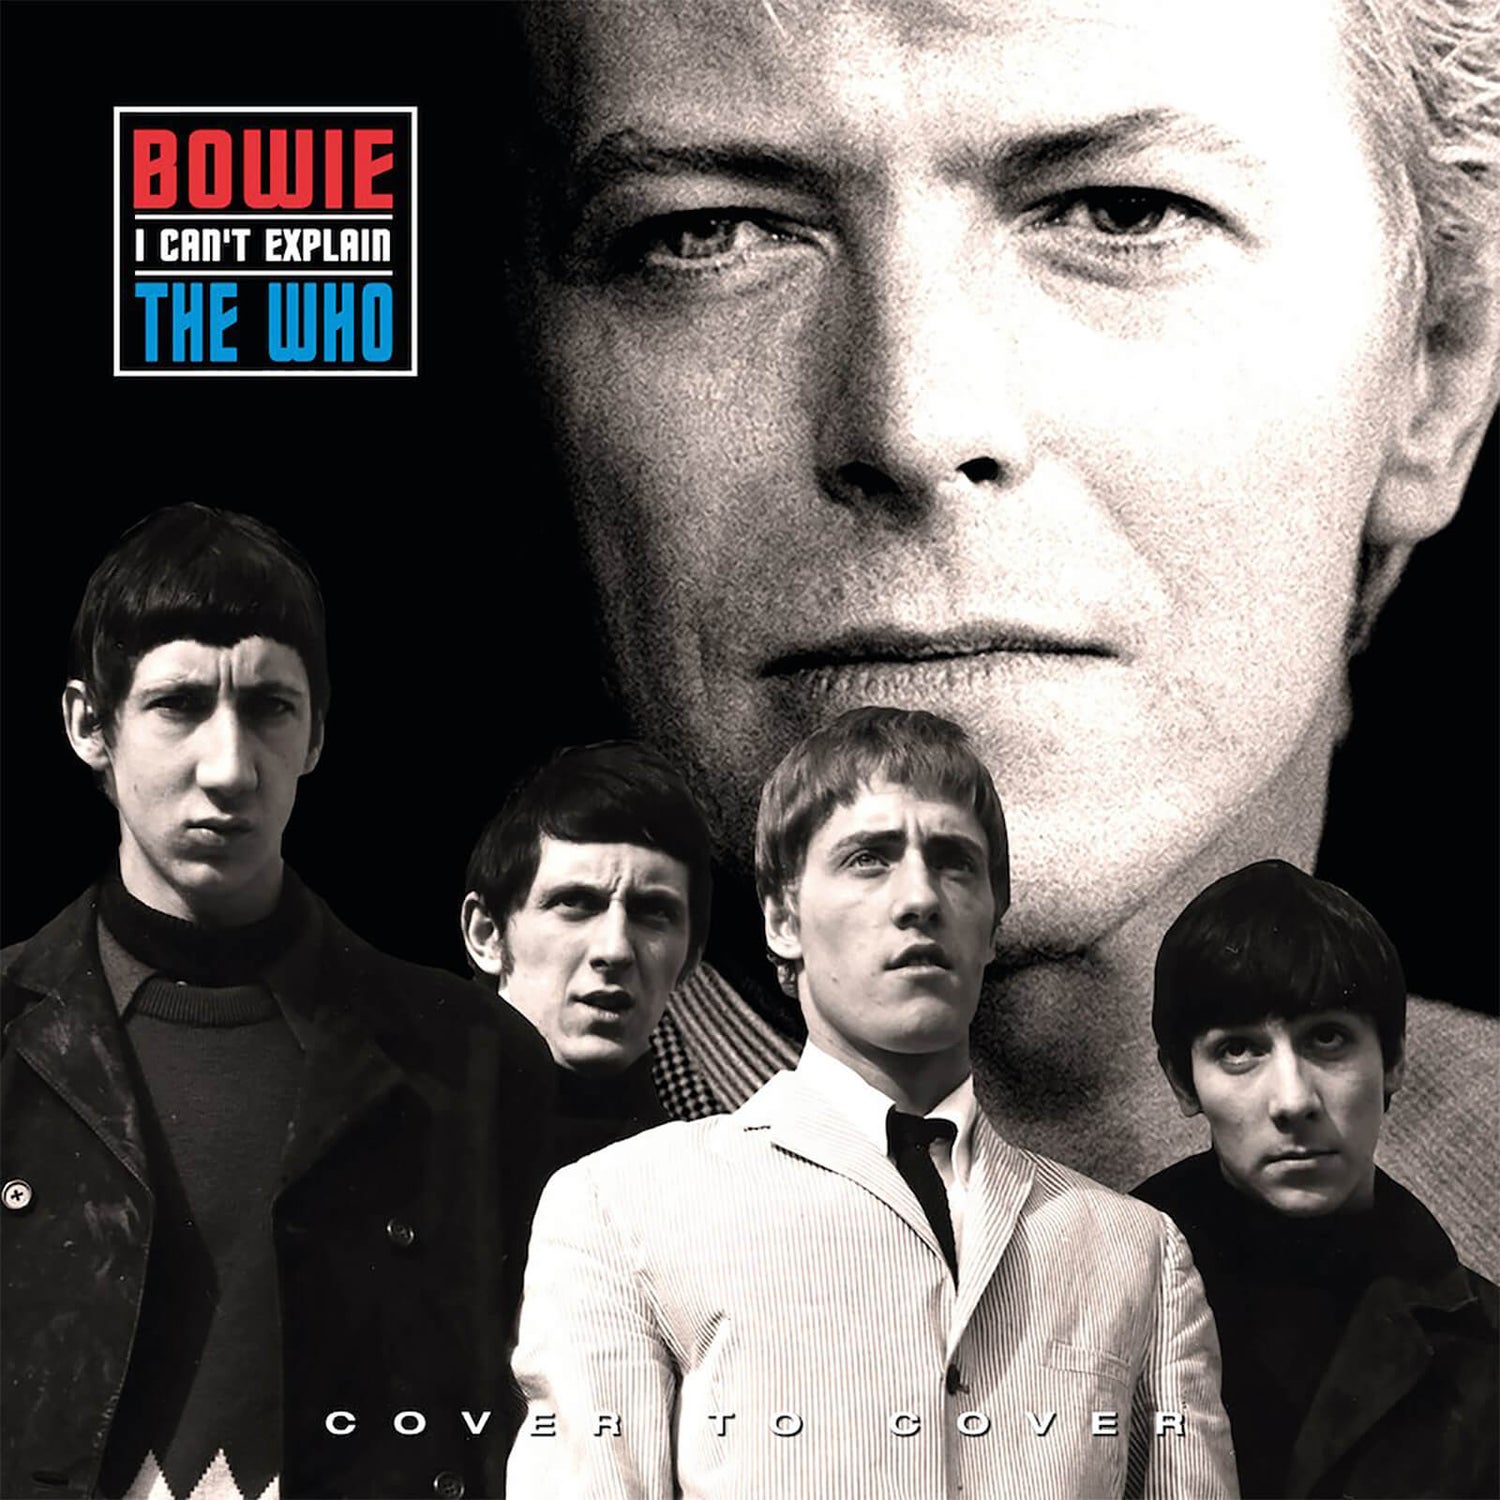 David Bowie / The Who - I Can't Explain (Rotes Vinyl) 18 cm